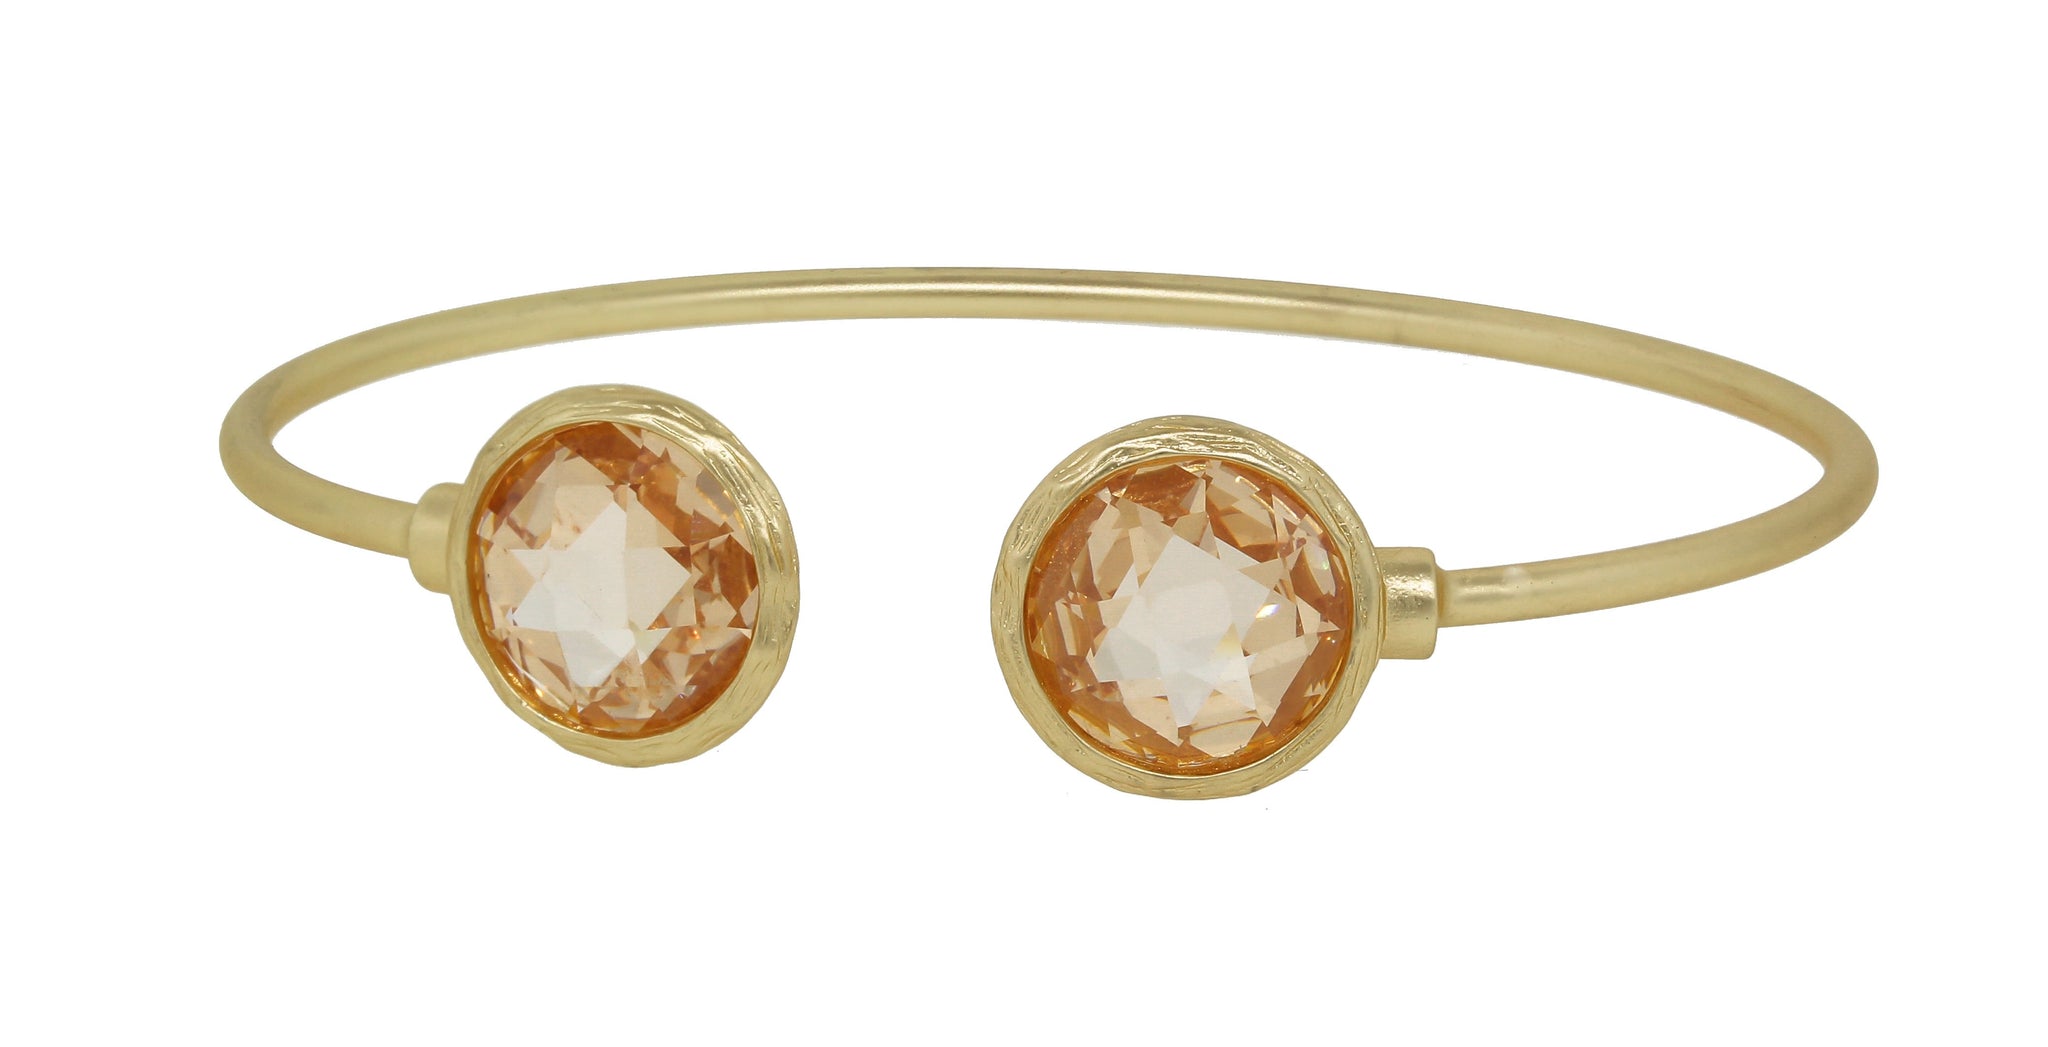 Thin Satin Gold Cuff Bangles with Round Stone Ends 681B5688